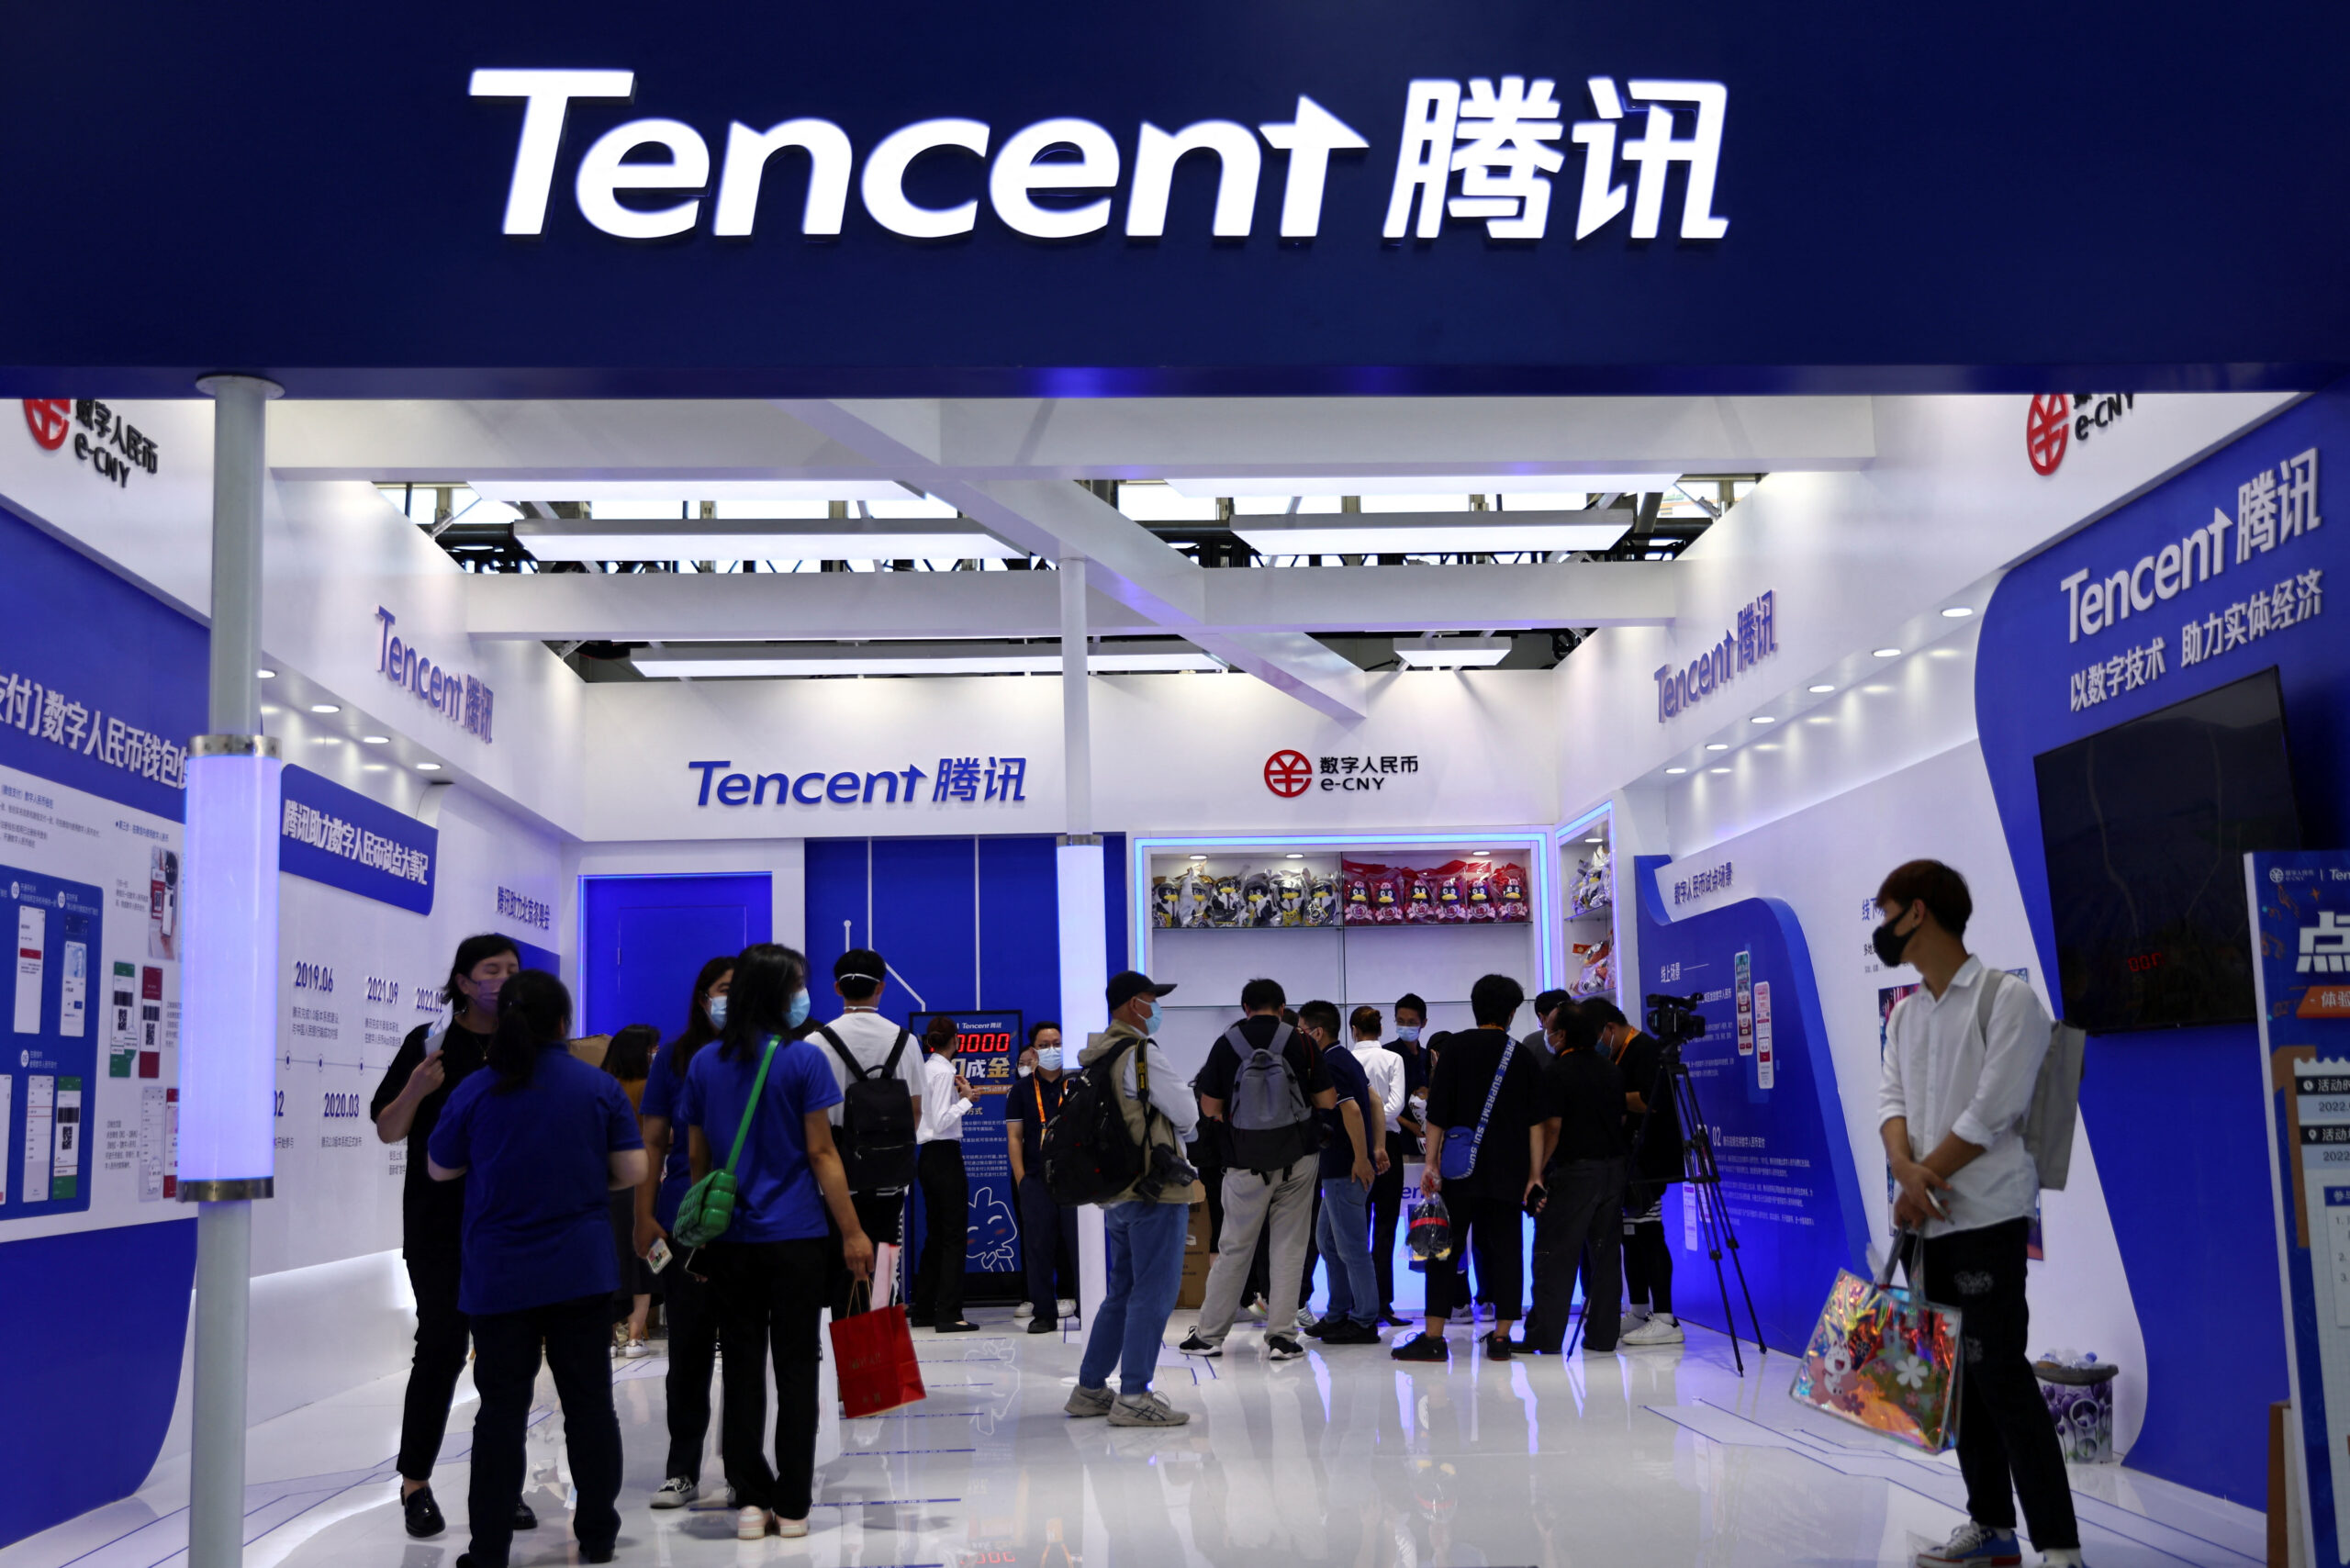 
Tencent's Big Moves: Partnering Up With Other Companies For Game-Changing Joint Ventures